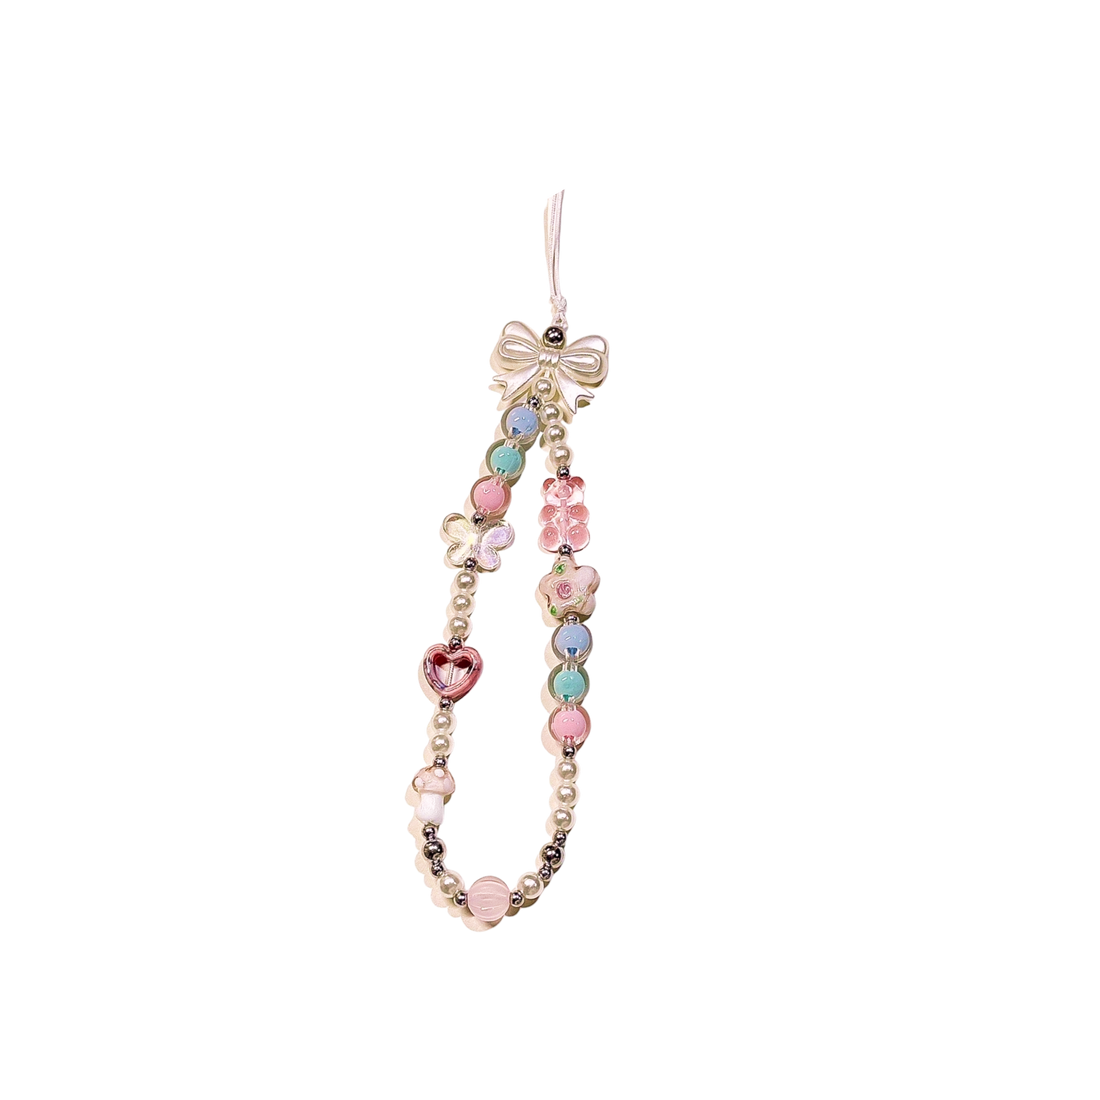 Bowknot Beaded Mobile Phone Charms Phone Bracelet Chain